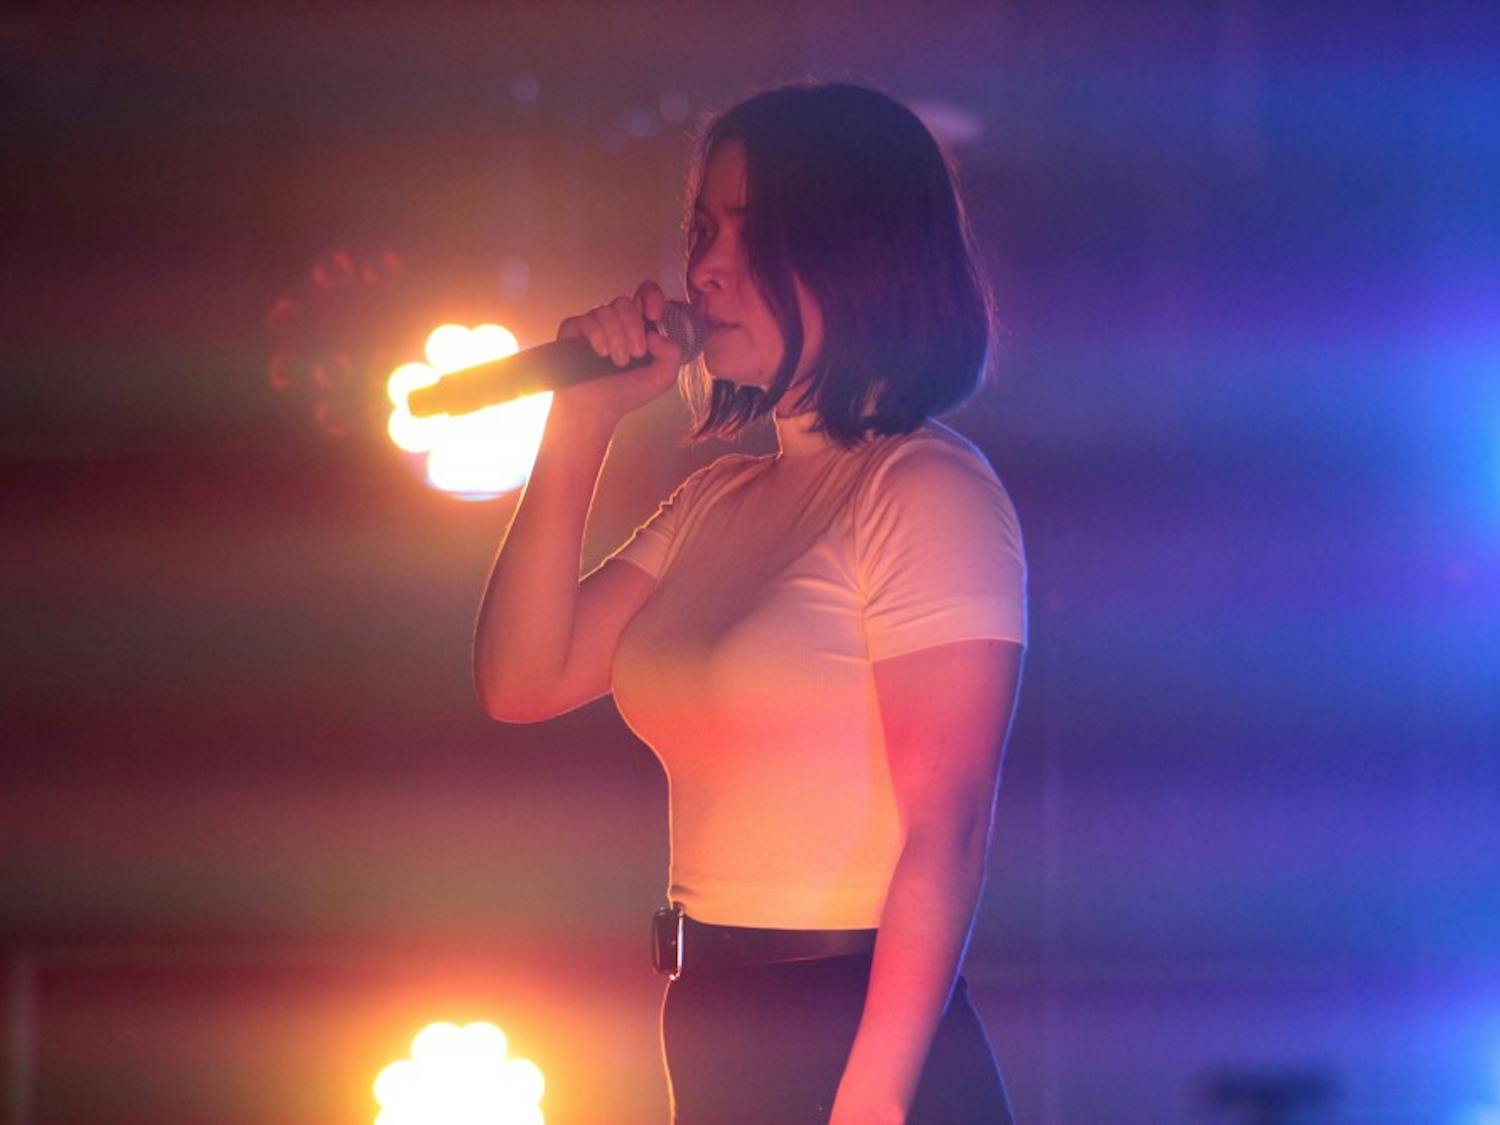 Mitski performed at Cat's Cradle on Wednesday, April 16, 2019 for one of two sold out shows.